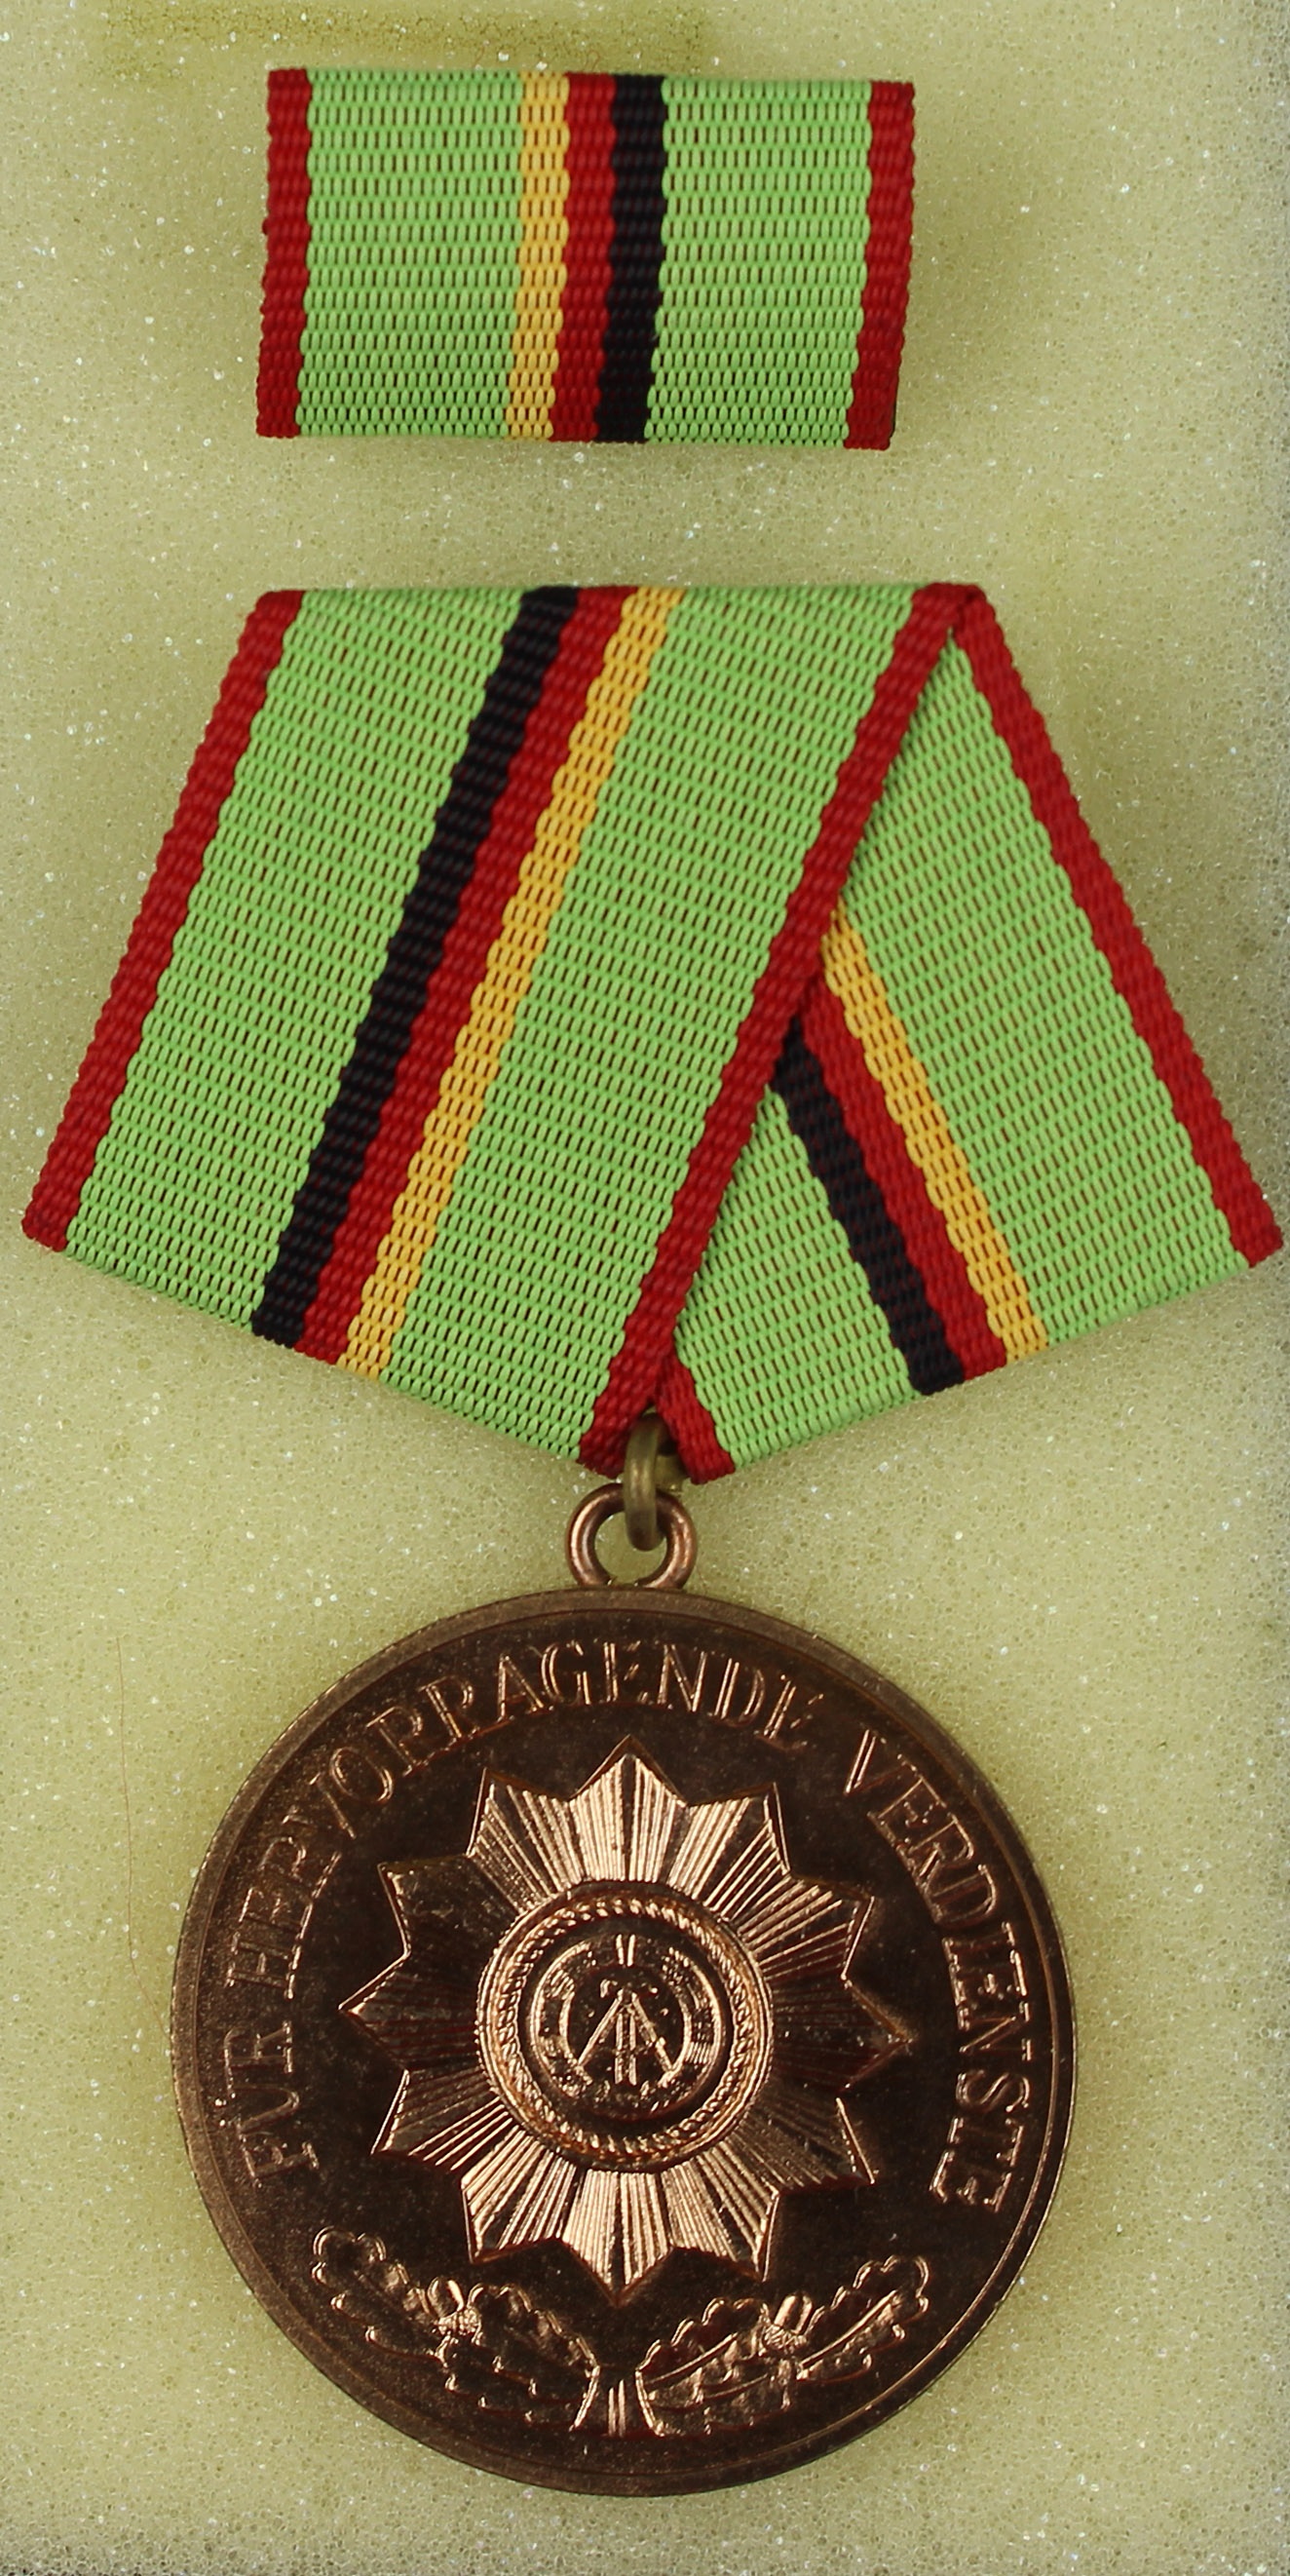 Medaille NVA-MDJ, 1989 (Museum Wolmirstedt RR-F)